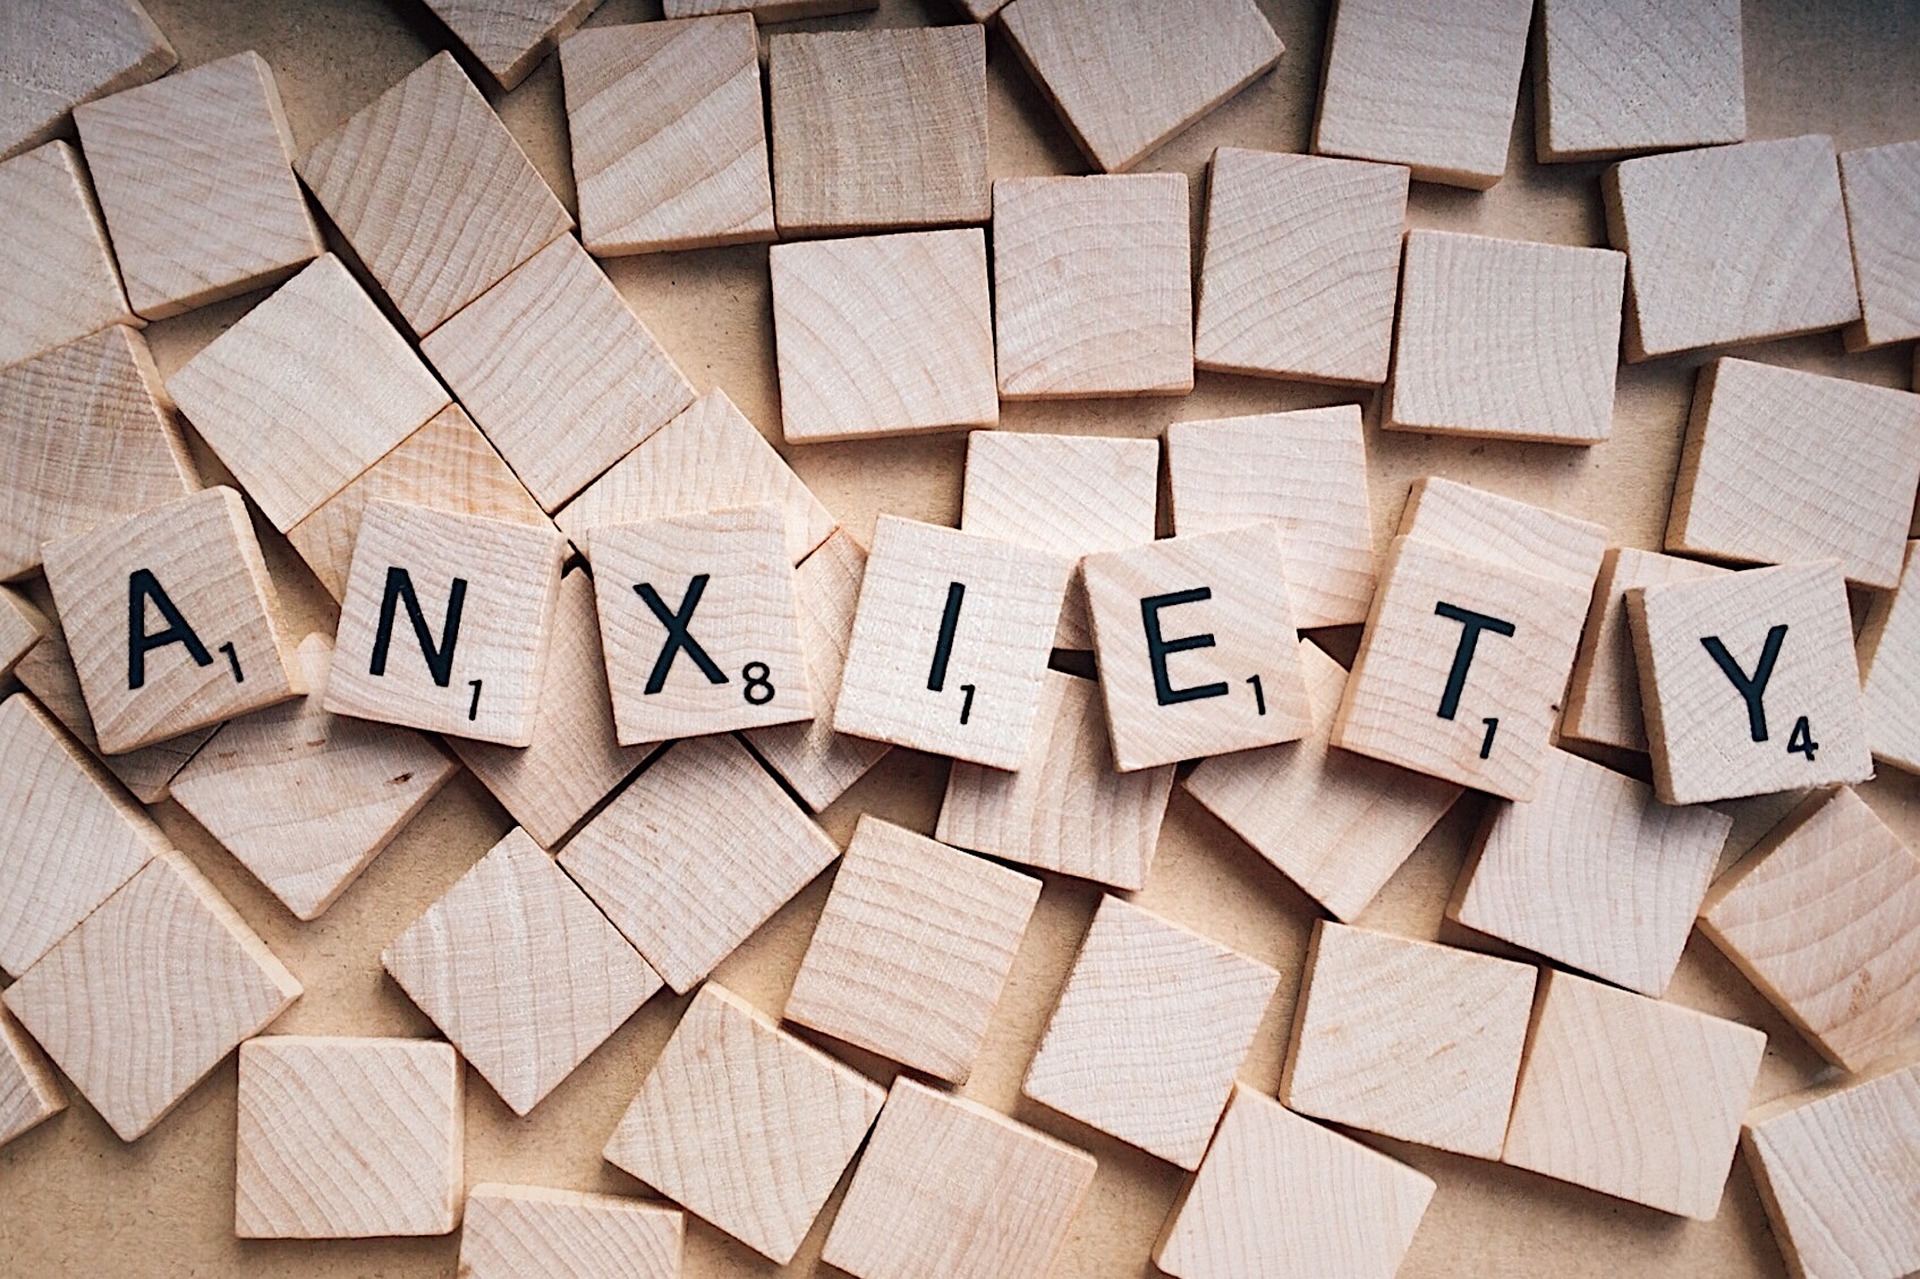 The word "anxiety" is spelled with scrabble tiles over a background of overturned scrabble tiles.